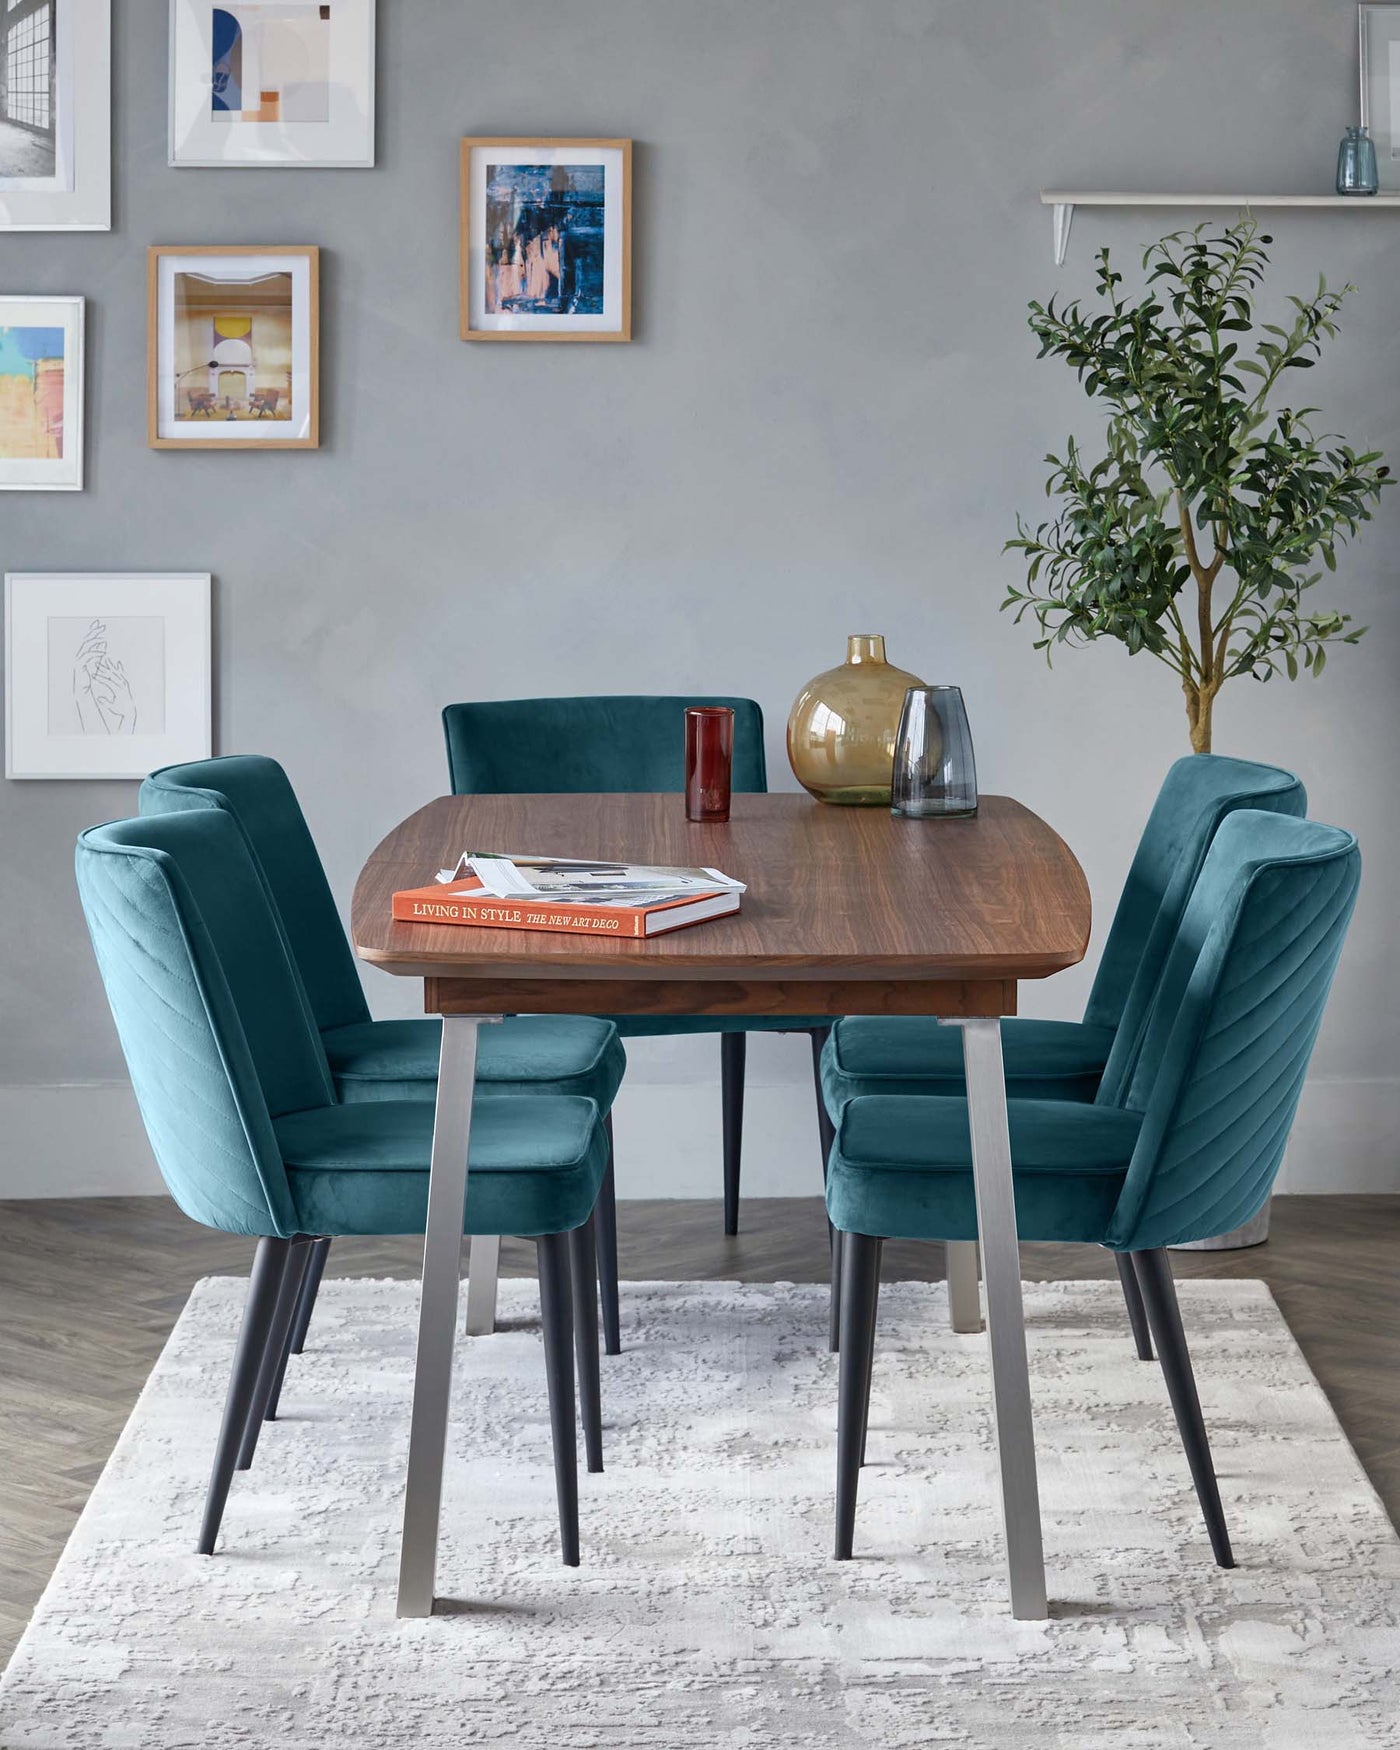 Elegant dining room setup featuring a contemporary round, walnut finish table with tapered metal legs, surrounded by four plush teal velvet chairs with channel tufting and metallic accents on the legs, arranged on a white and grey patterned area rug.